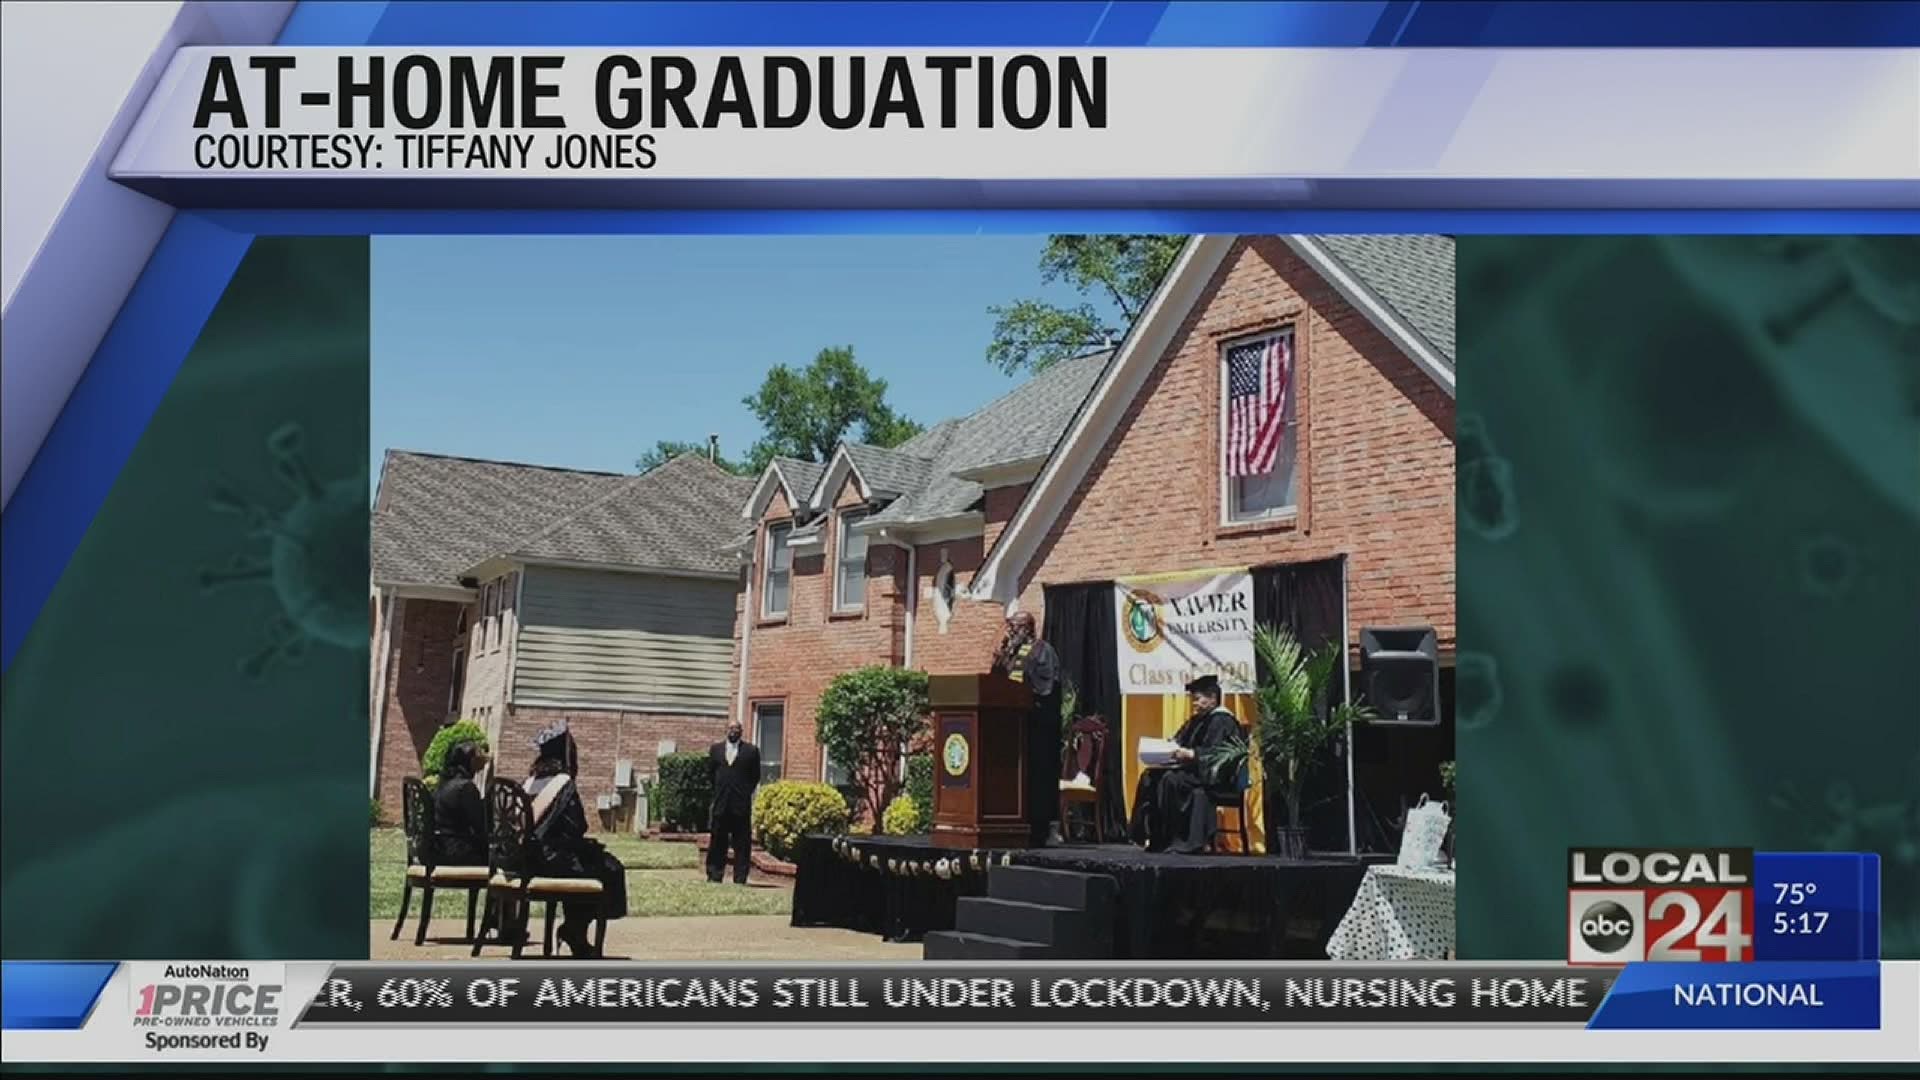 Family gave their daughter a special outdoor graduation at a distance.